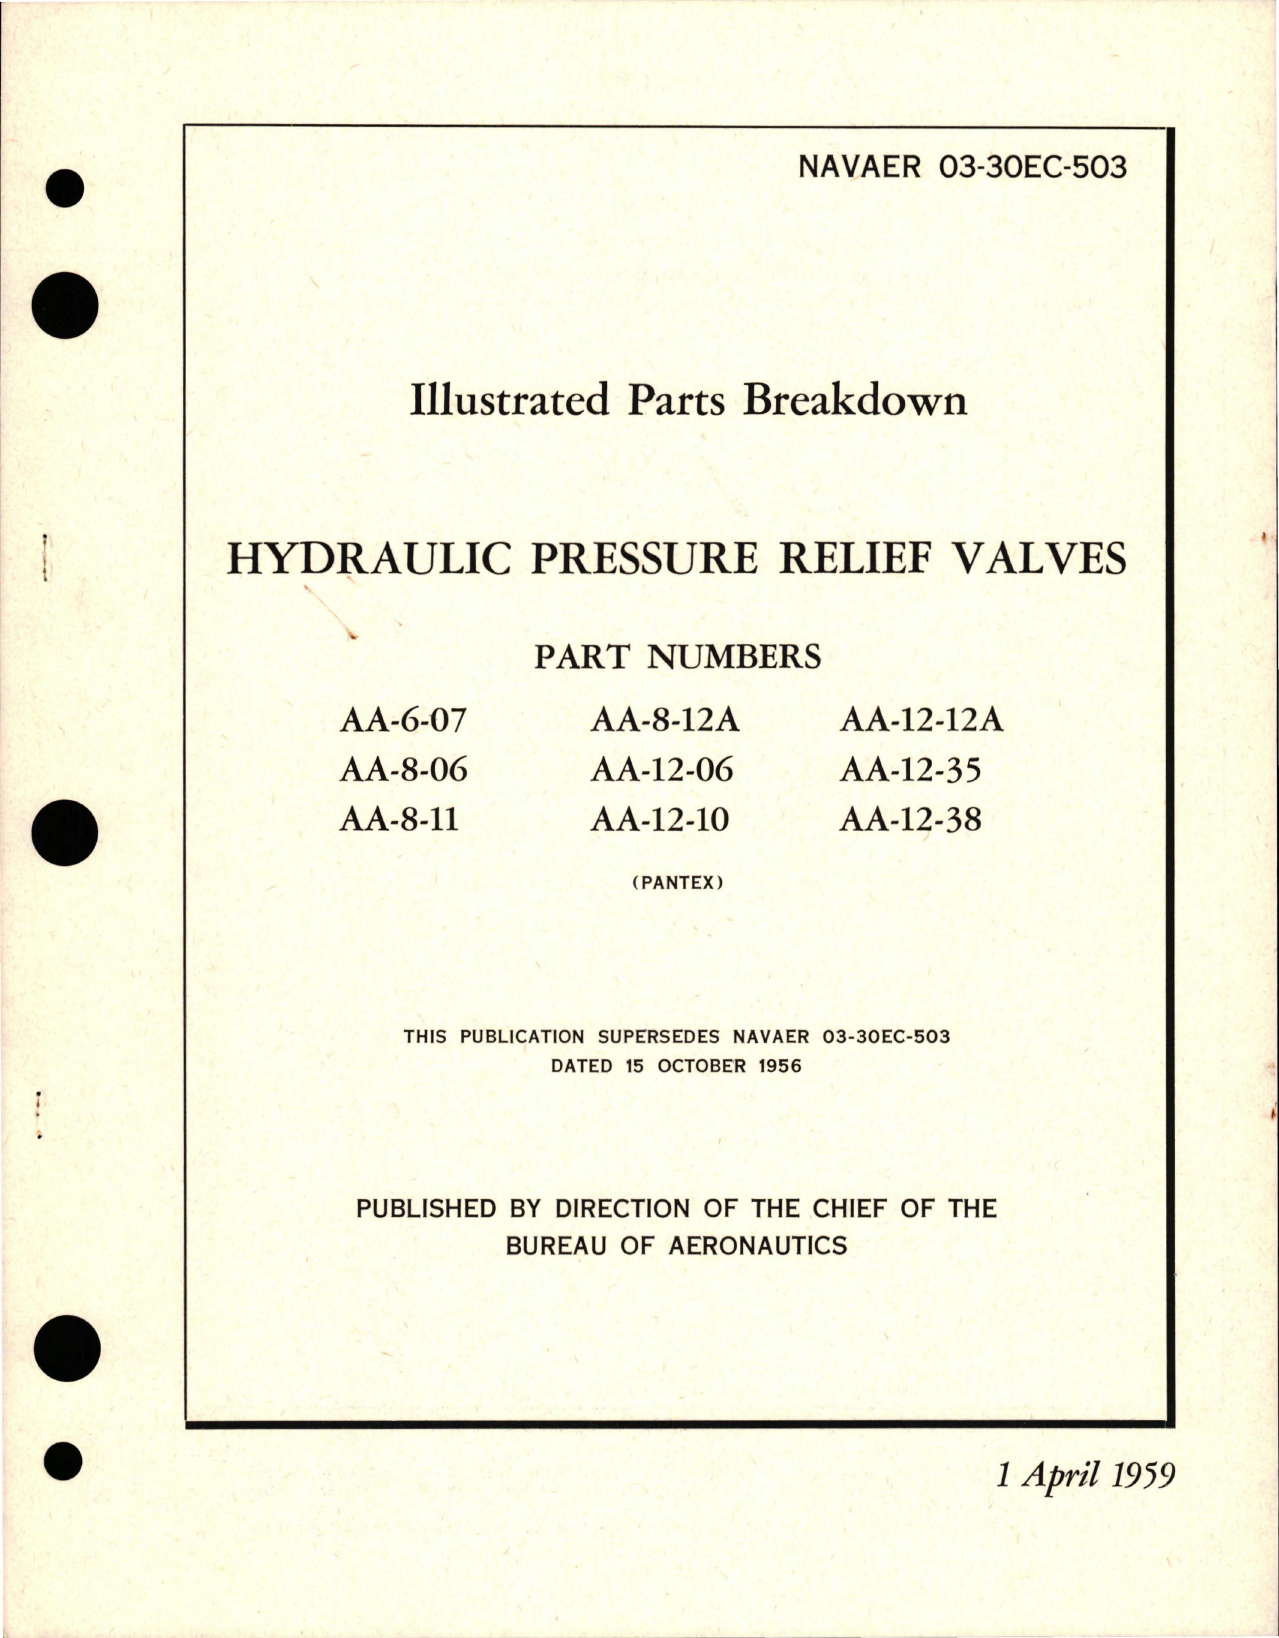 Sample page 1 from AirCorps Library document: Illustrated Parts Breakdown for Hydraulic Pressure Relief Valves